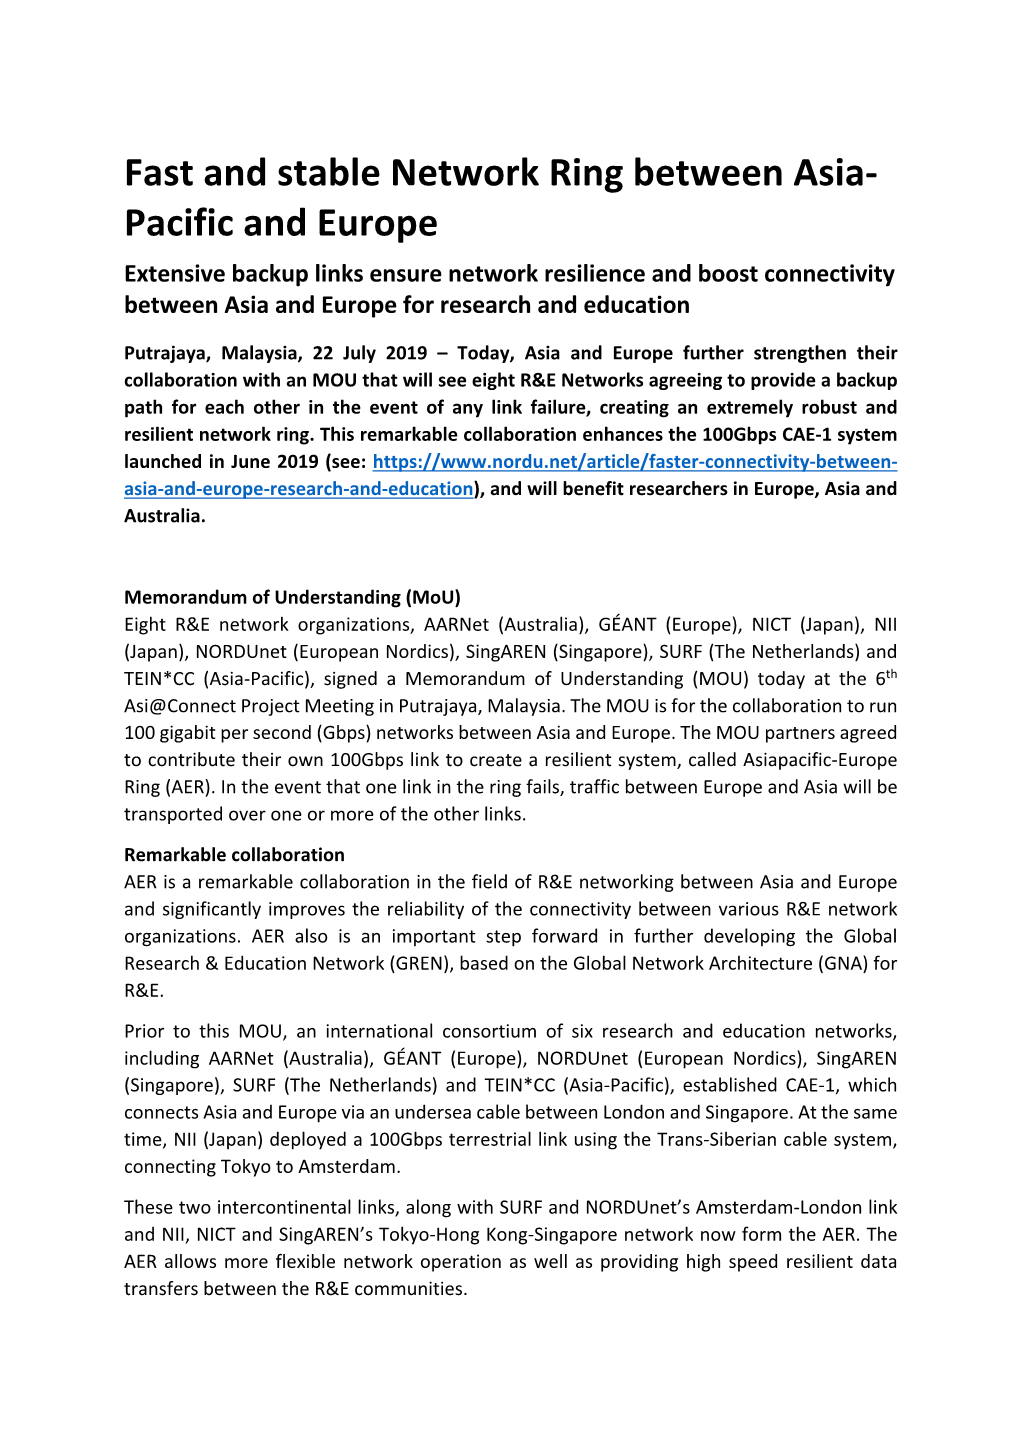 Fast and Stable Network Ring Between Asia- Pacific and Europe